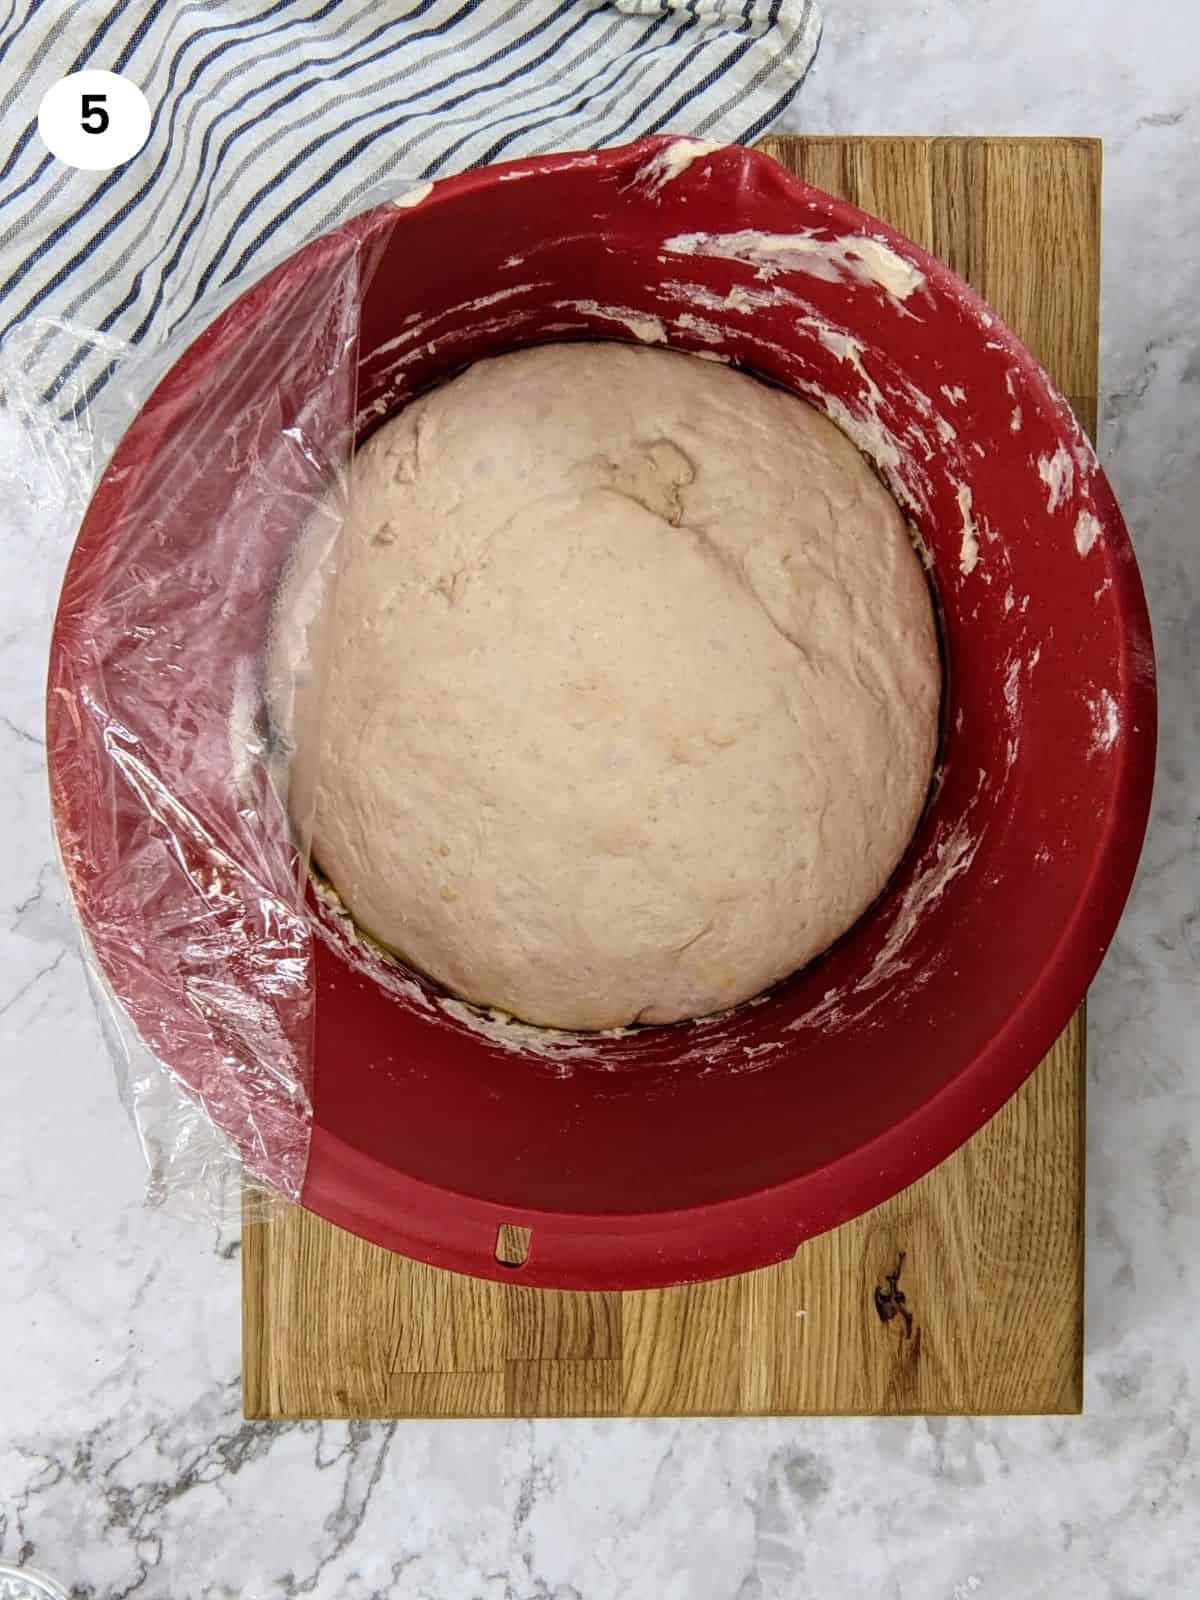 Dough after it has risen and double in size.